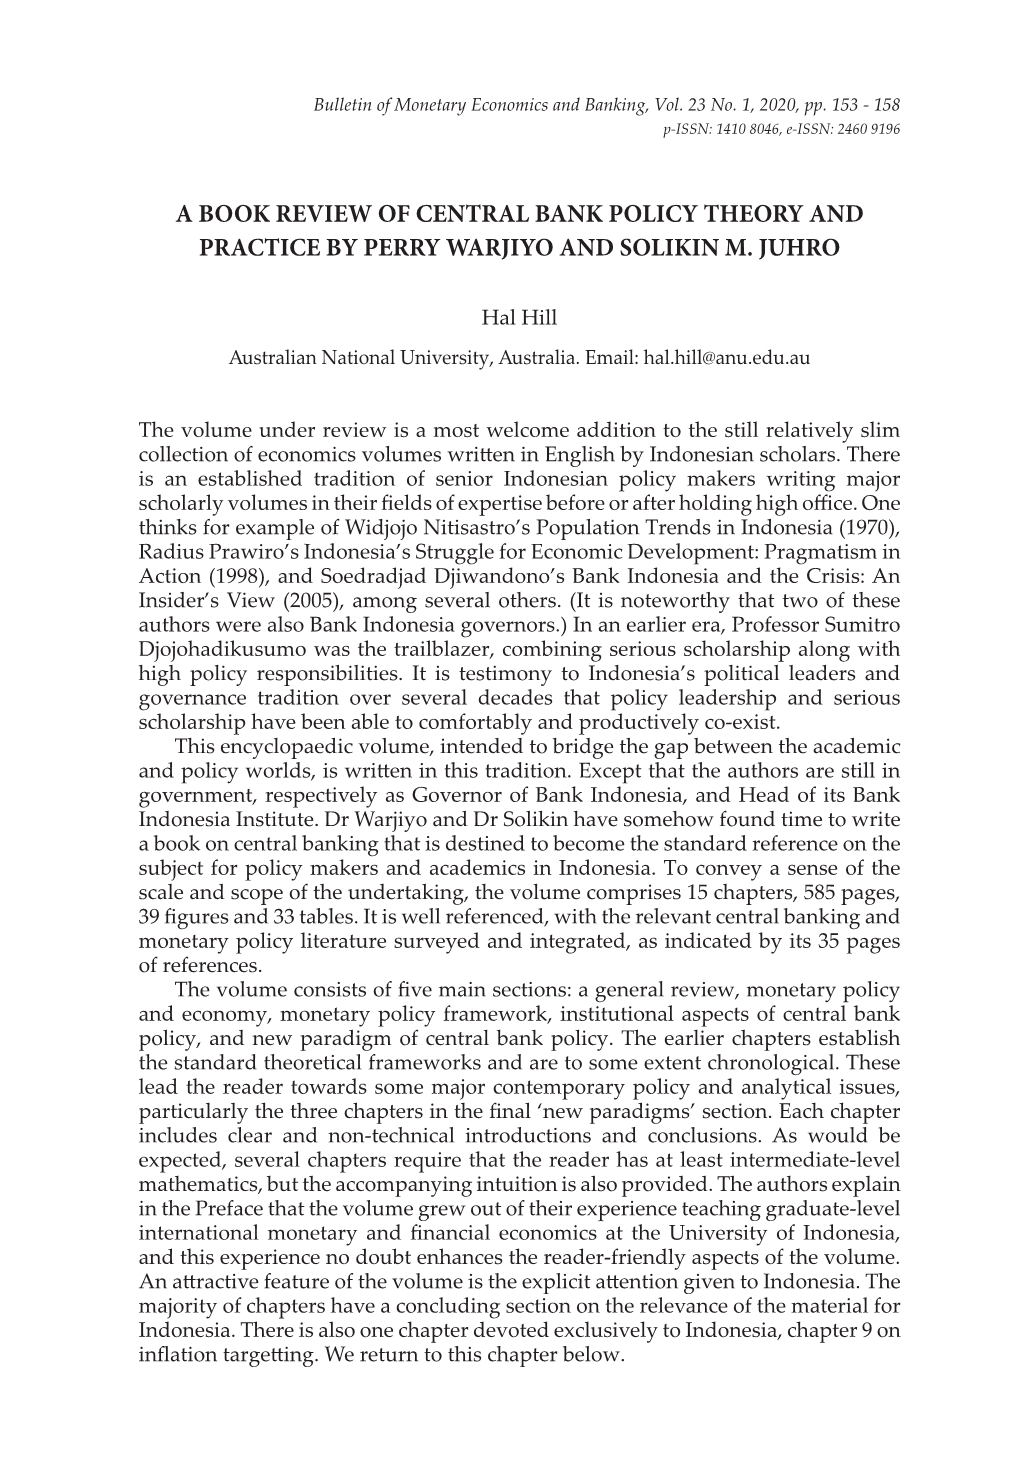 A Book Review of Central Bank Policy Theory and Practice by Perry Warjiyo and Solikin M. Juhro